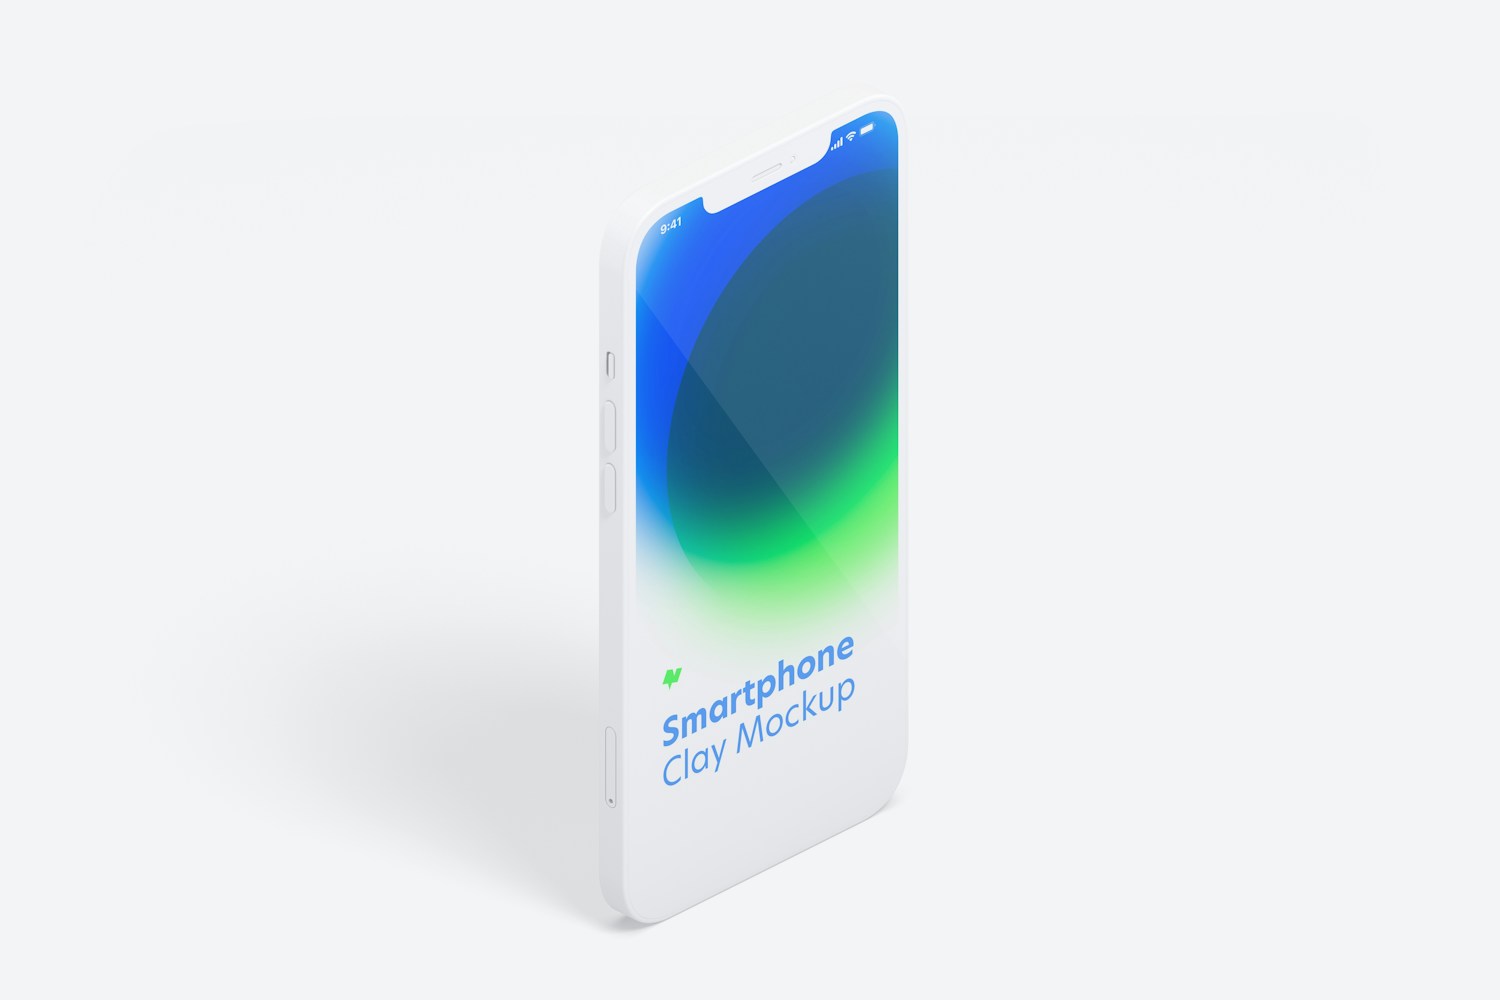 Isometric Clay iPhone 12 Mockup, Portrait Right View